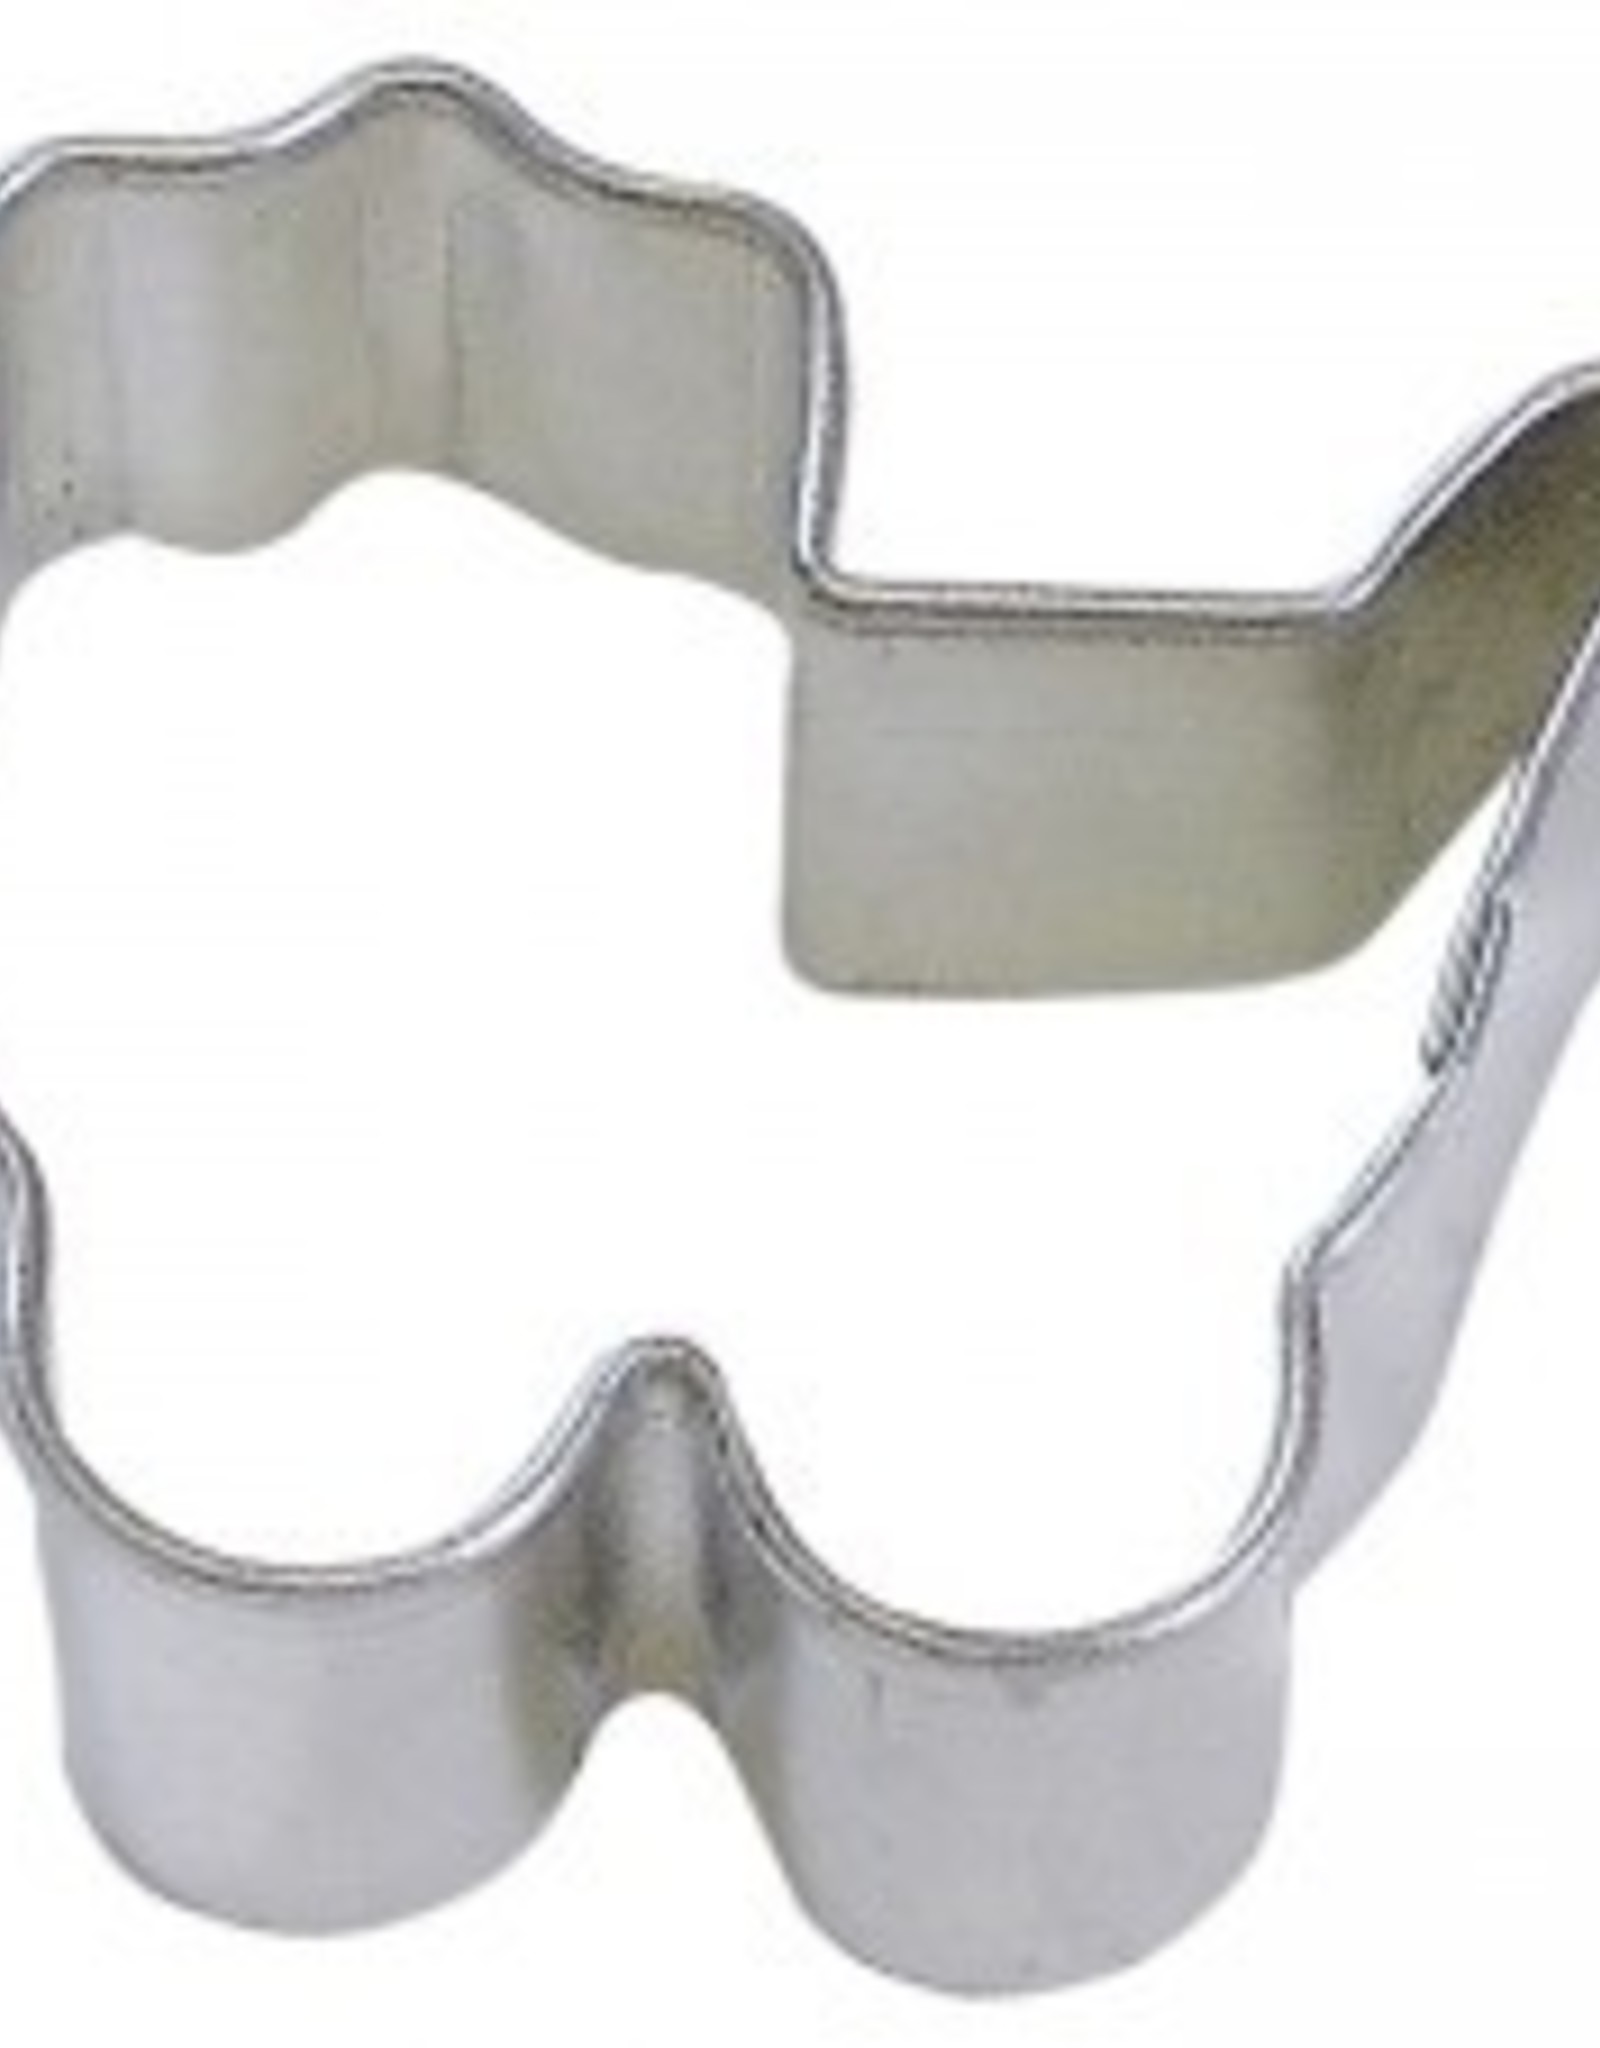 Mini Baby Carriage Cookie Cutter